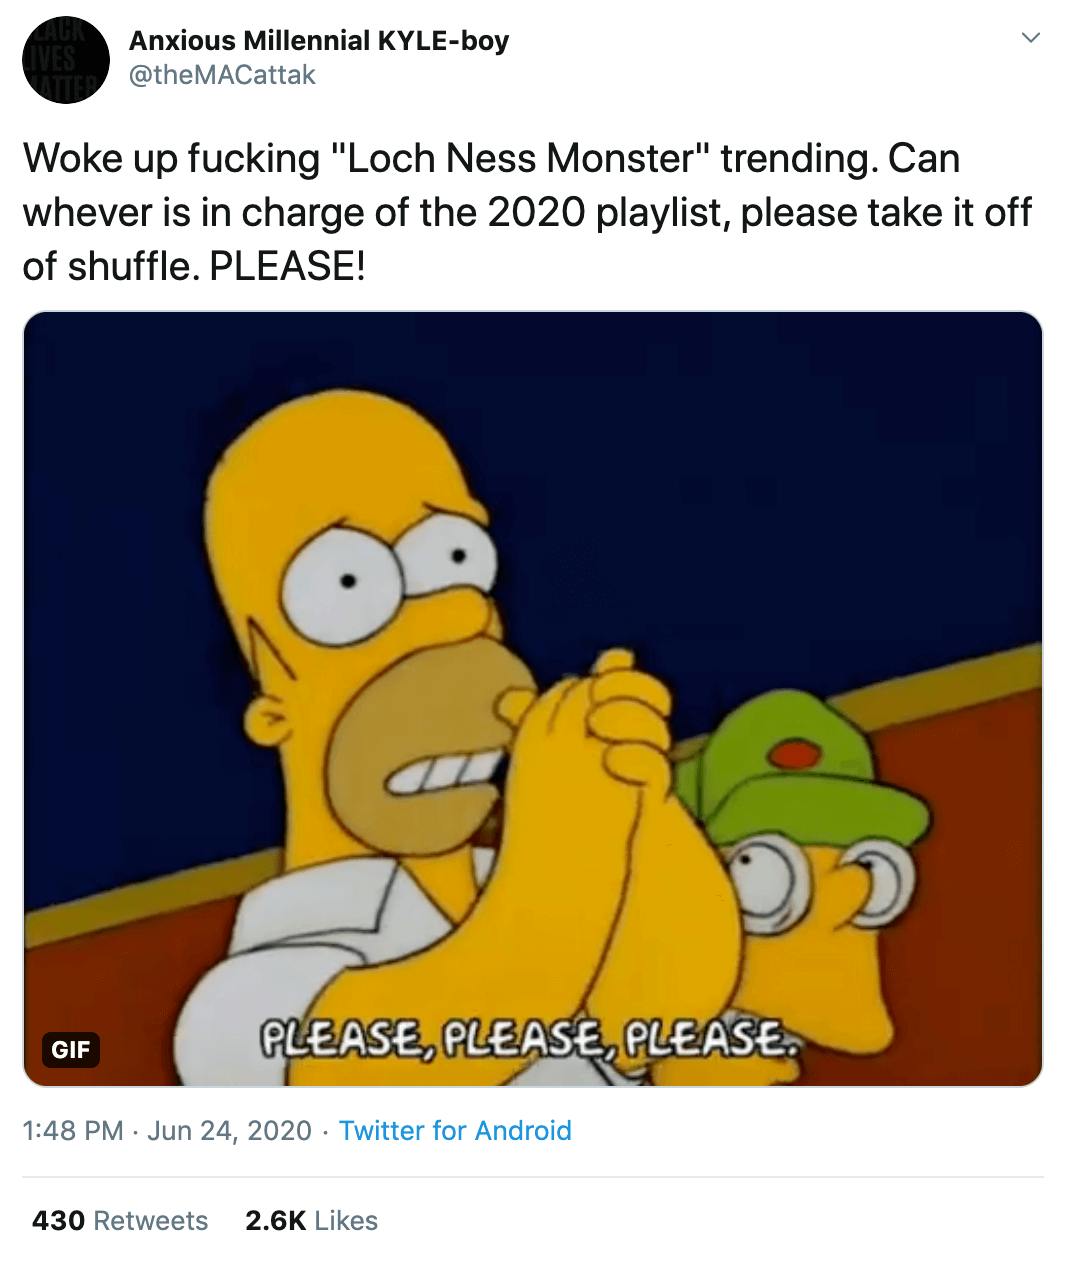 "Woke up fucking "Loch Ness Monster" trending. Can whever is in charge of the 2020 playlist, please take it off of shuffle. PLEASE!" Gif of Homer Simpson begging